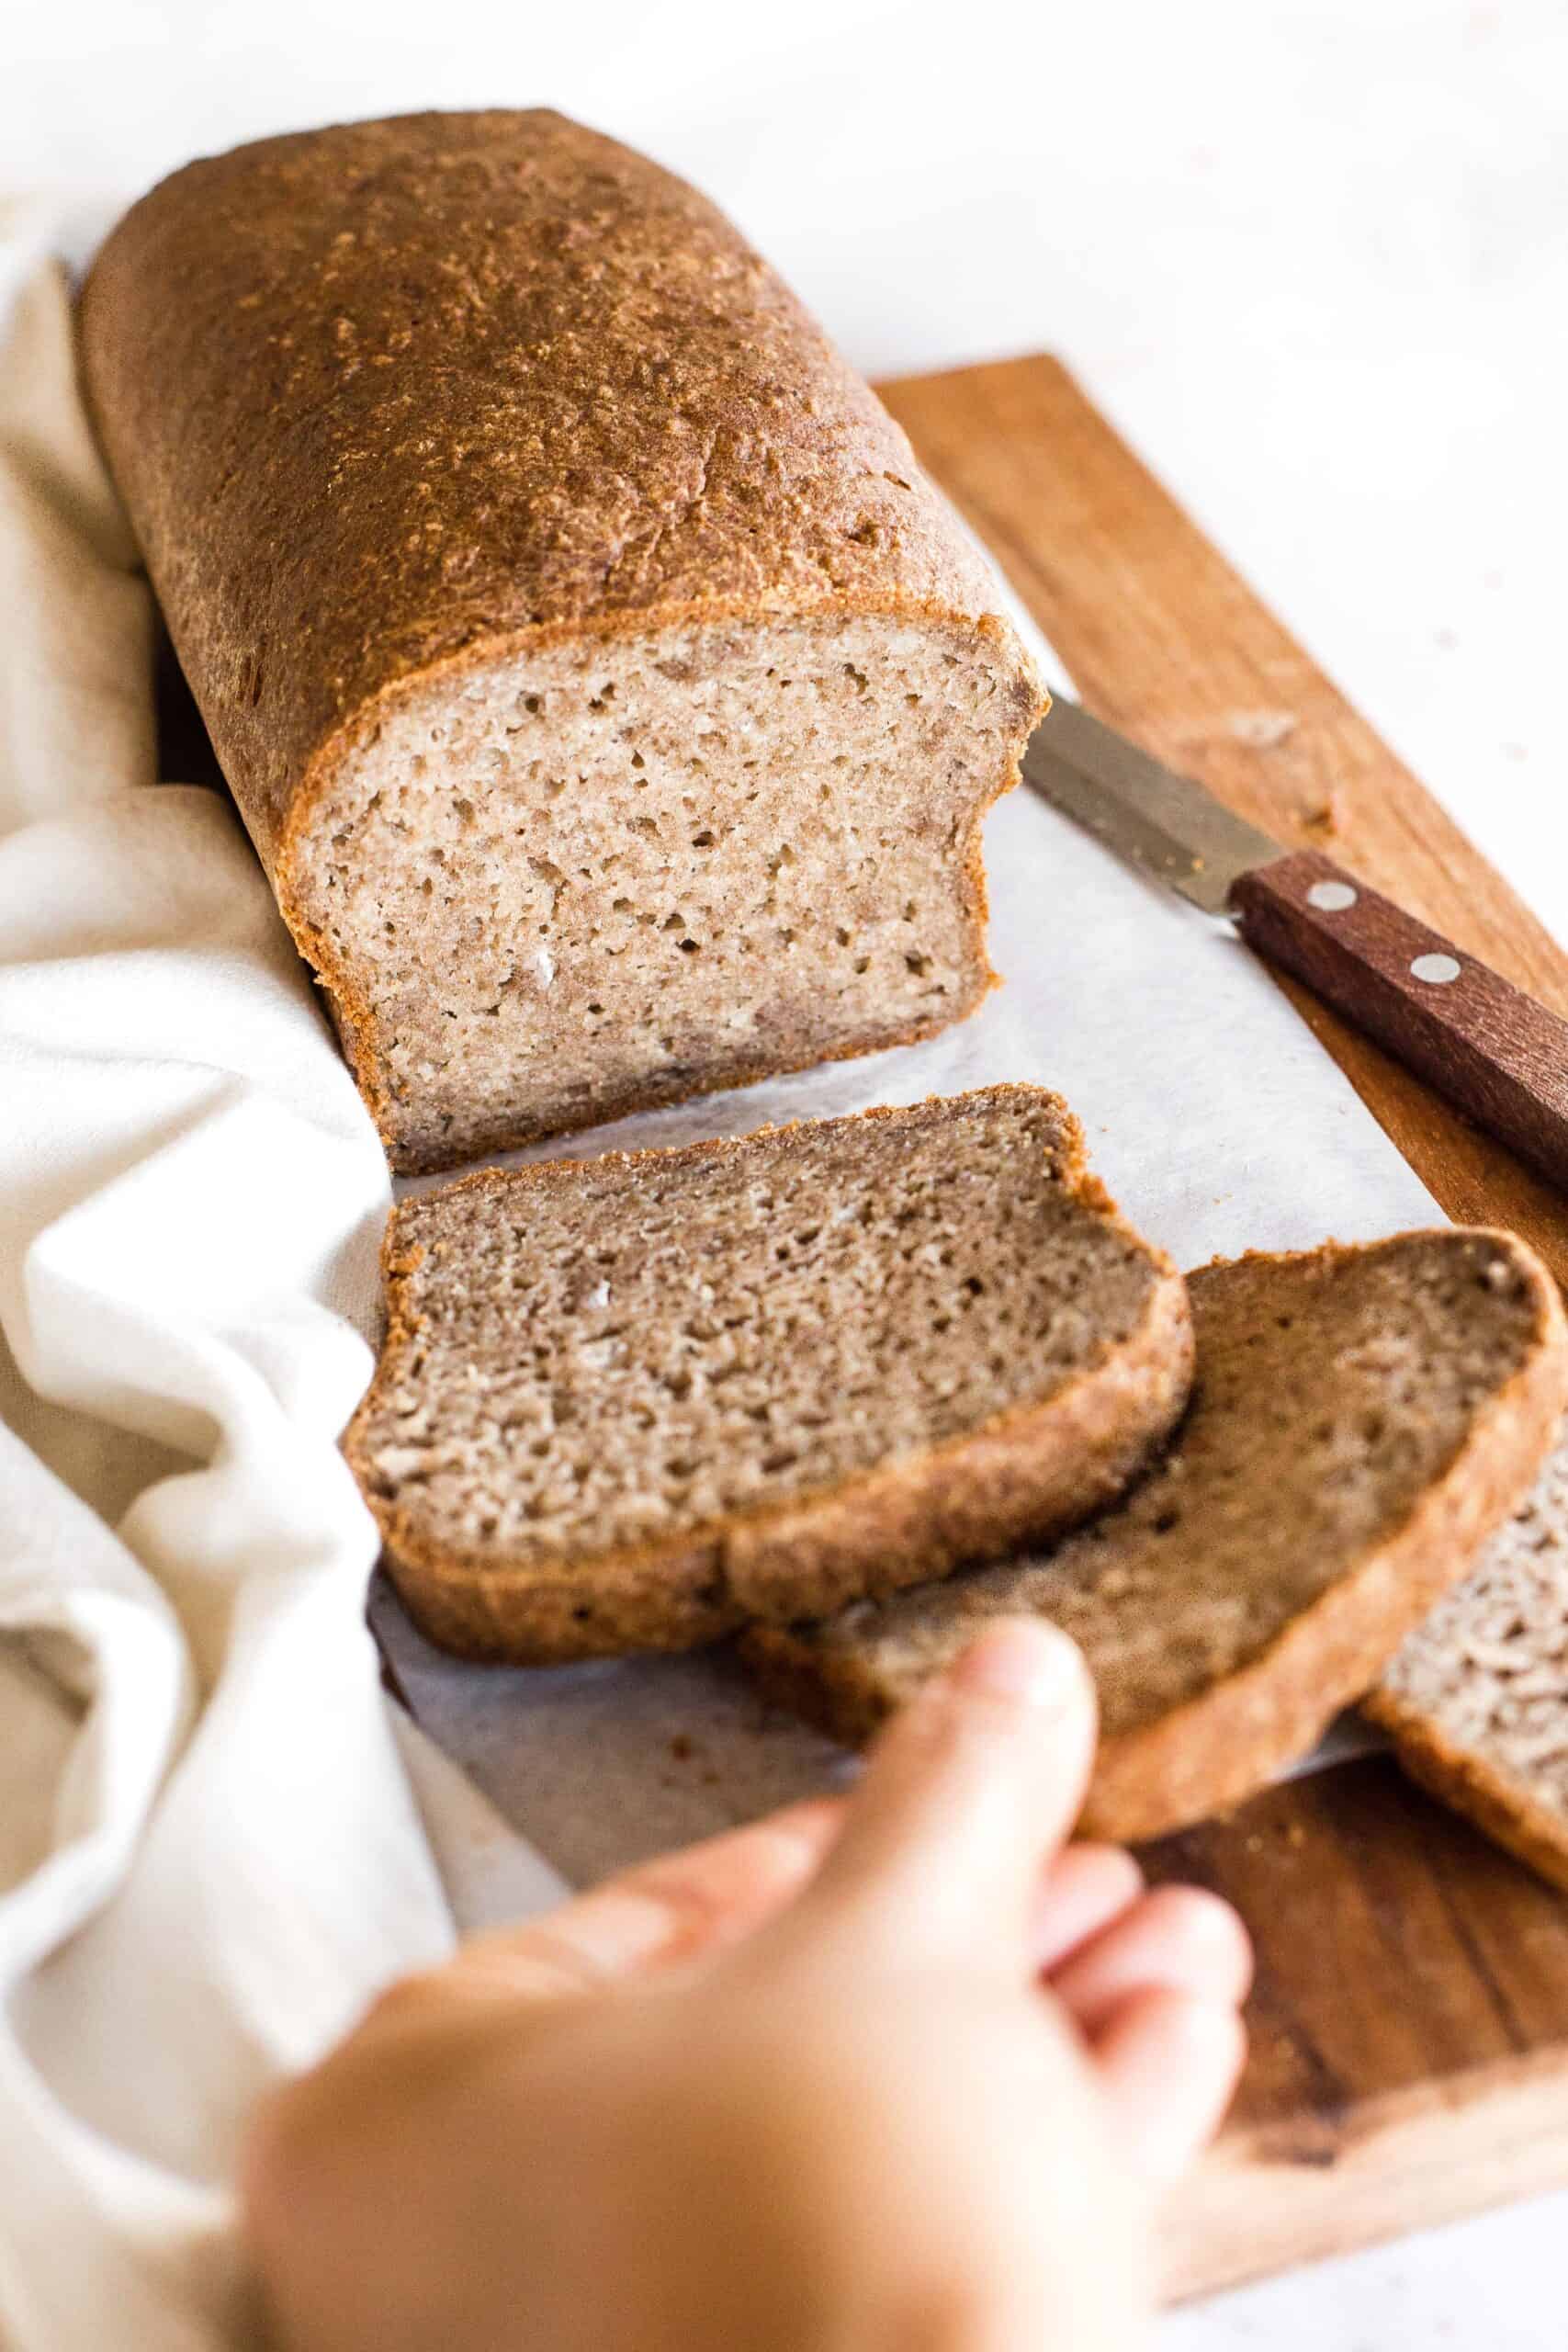 Reaching for a slice of teff bread.